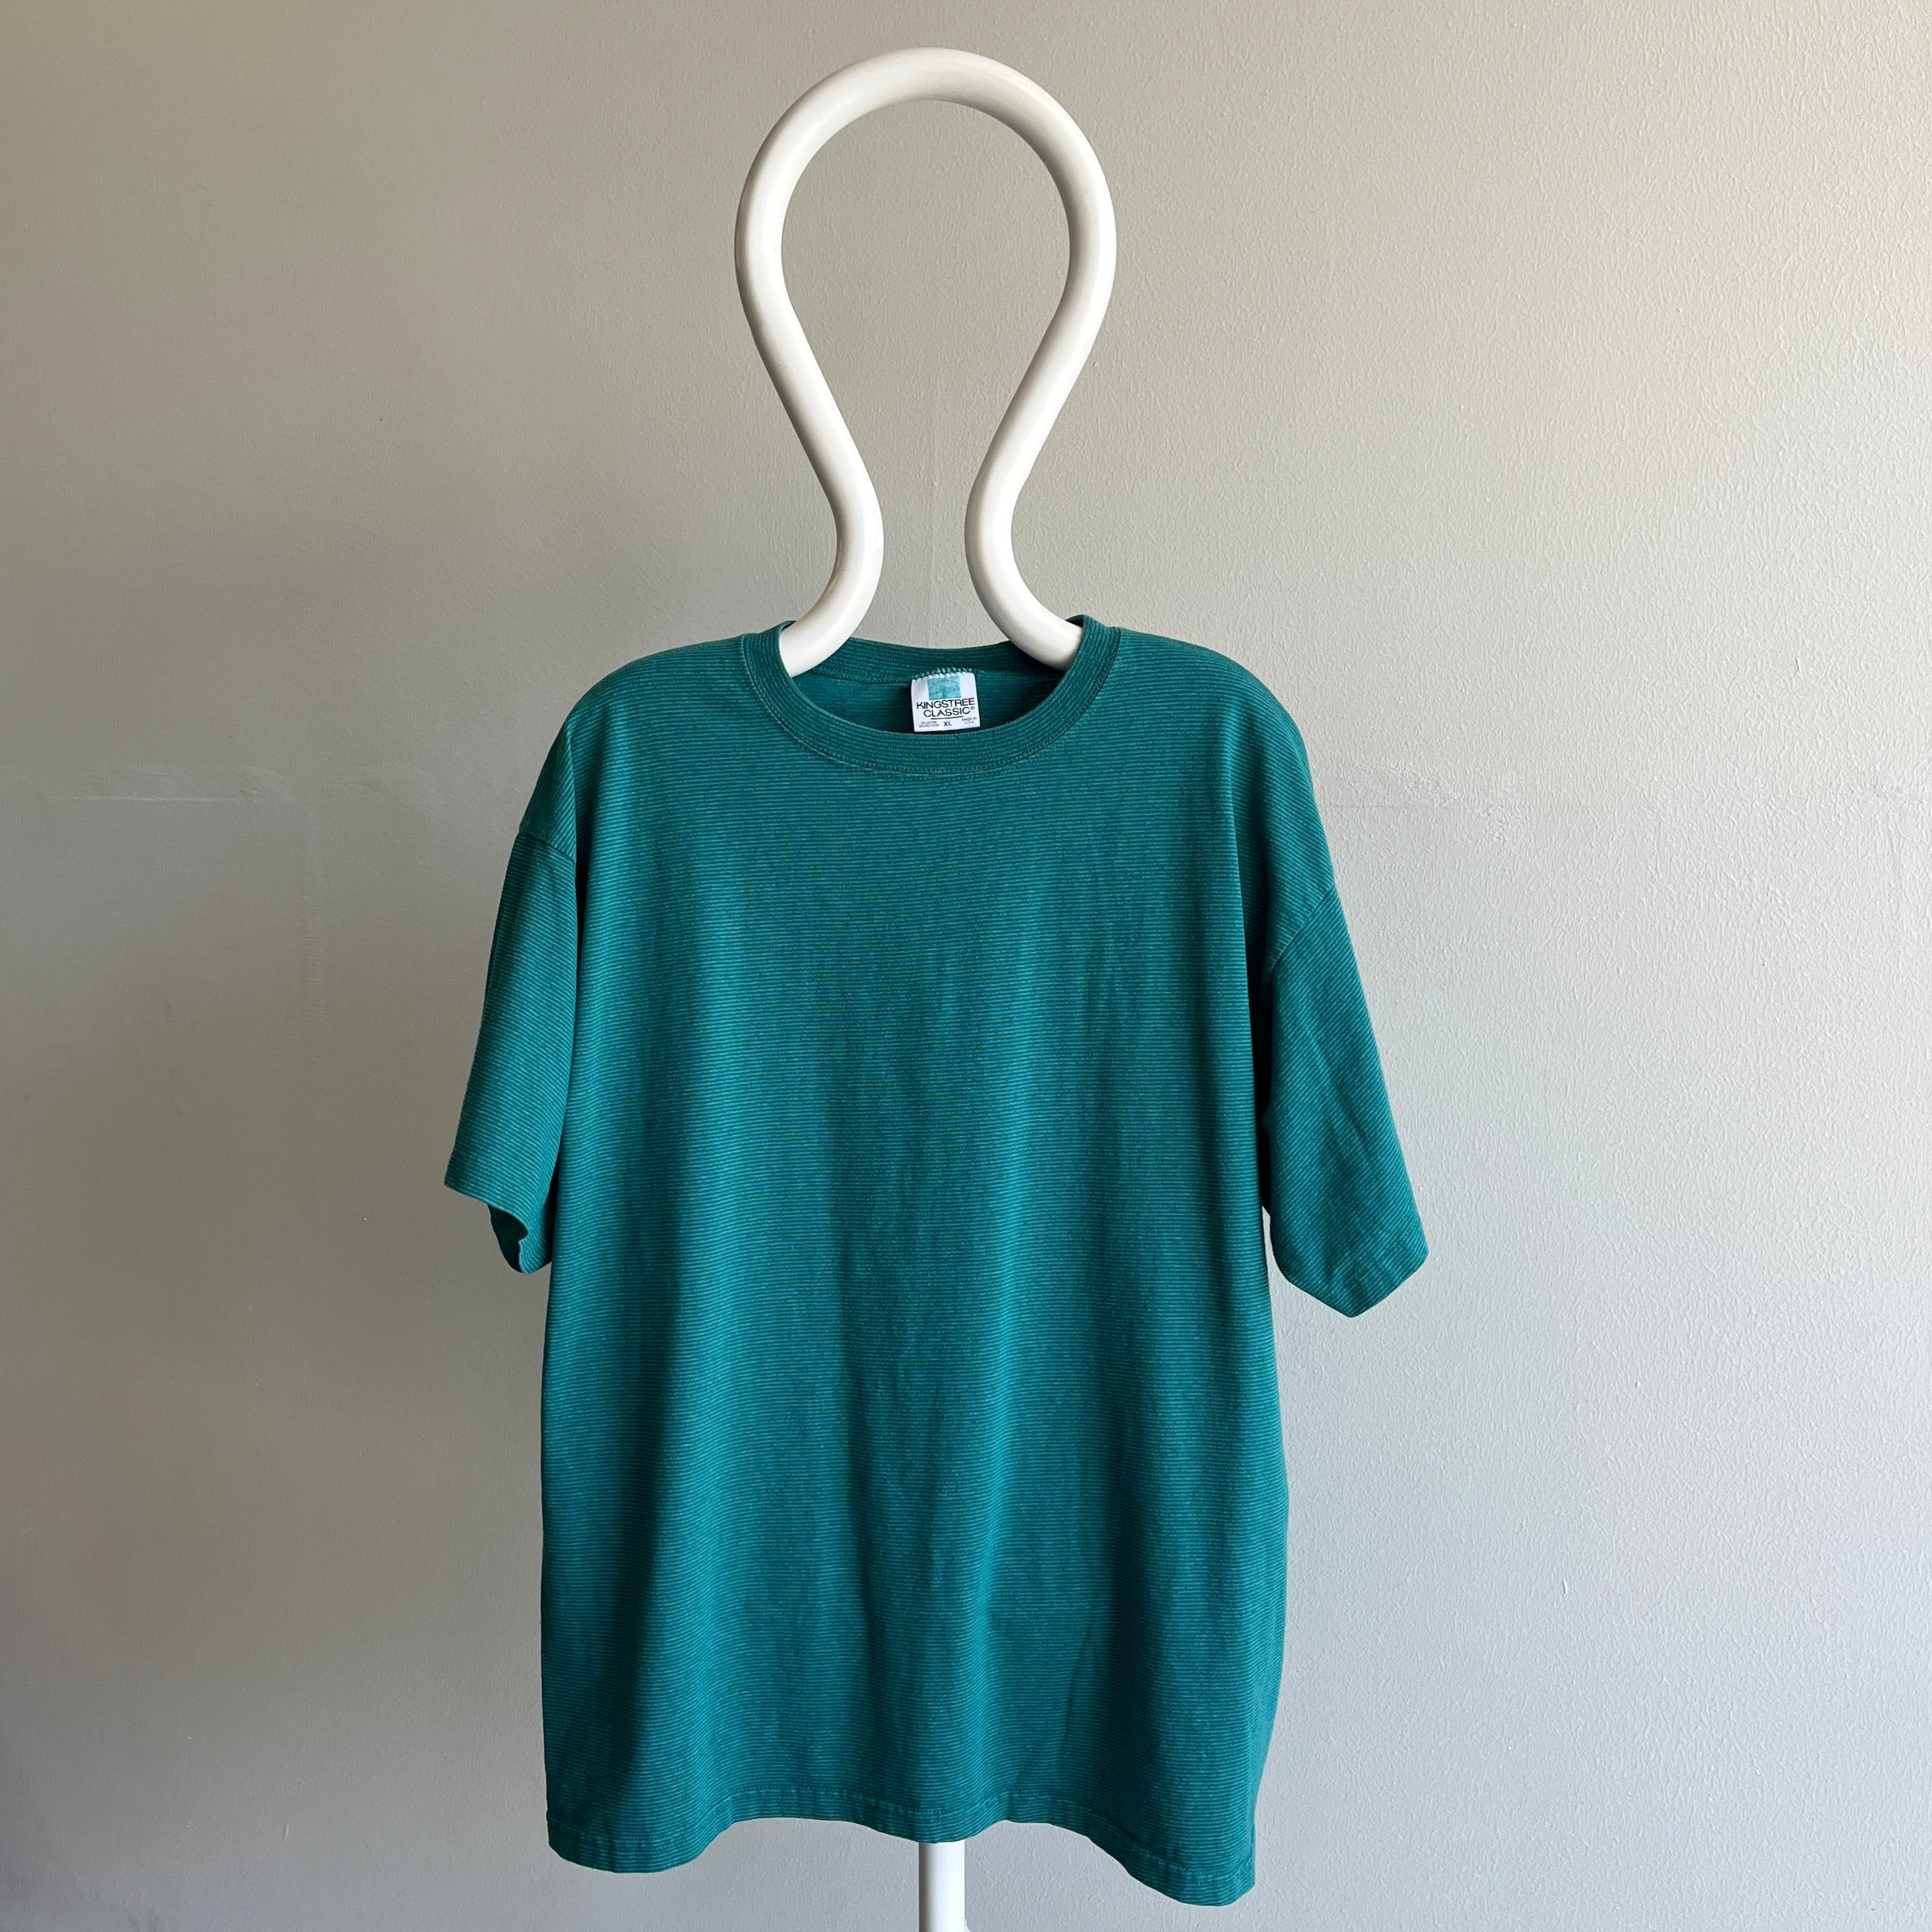 1990s Blank Pinstriped Teal T-Shirt